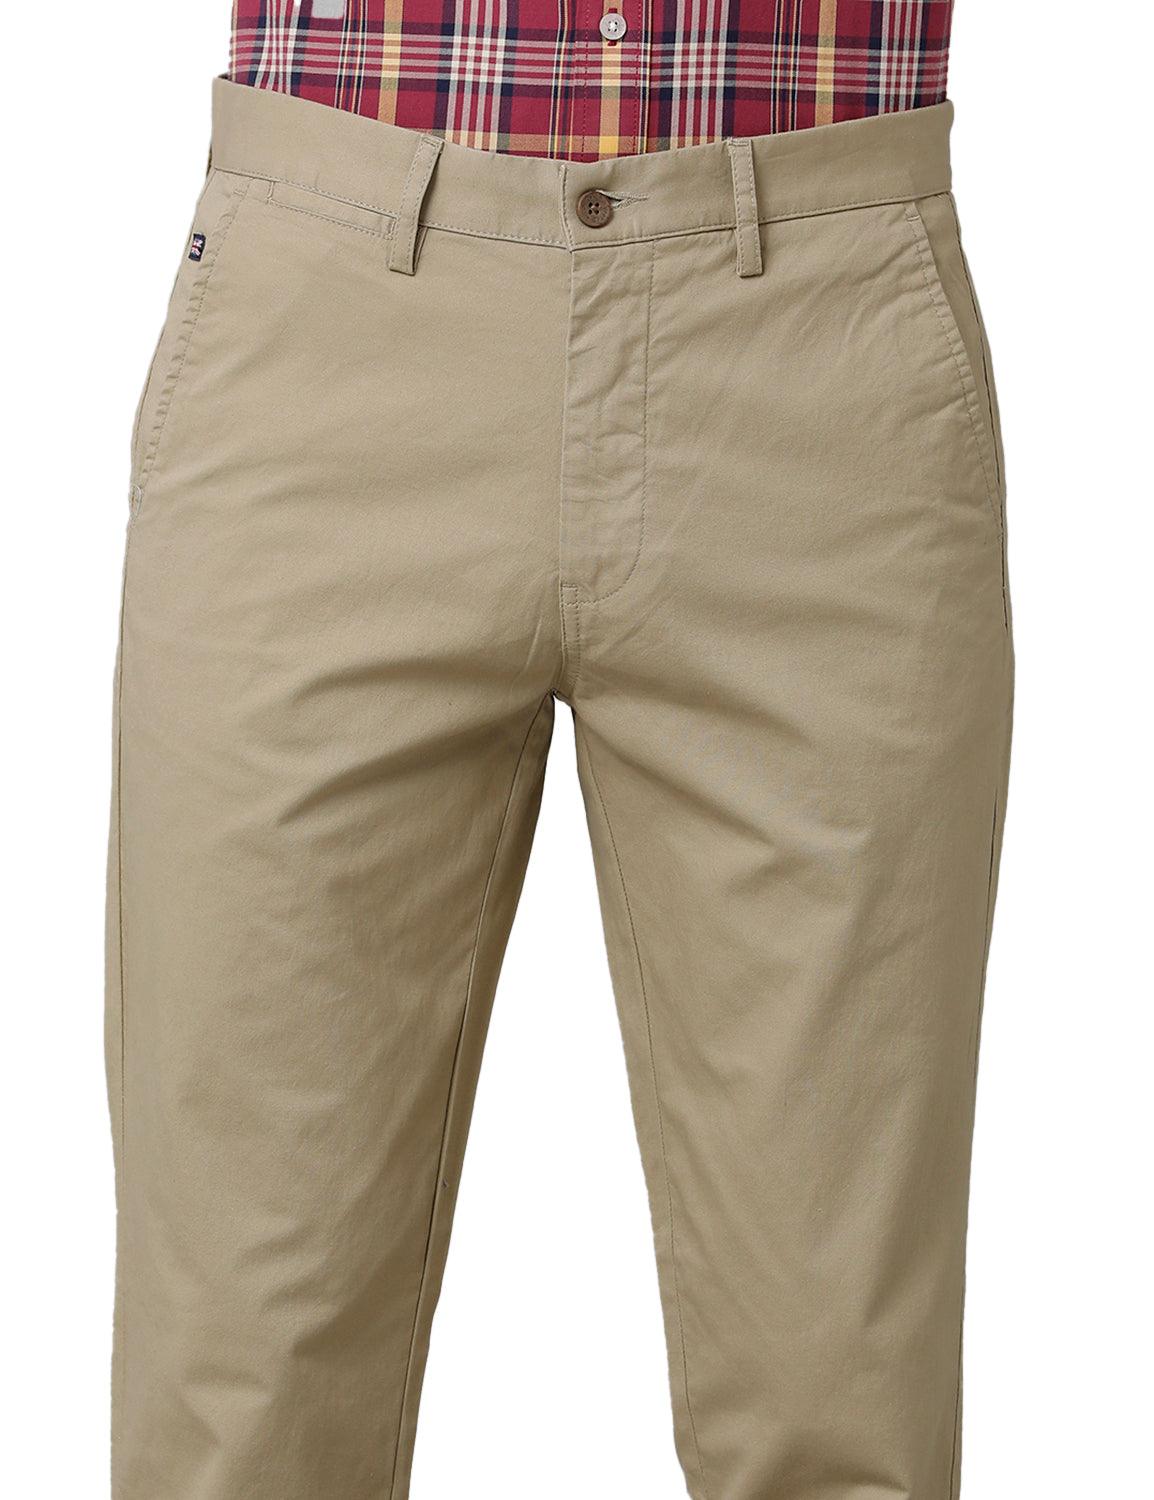 Beige Solid Slim Fit Trouser - Double Two